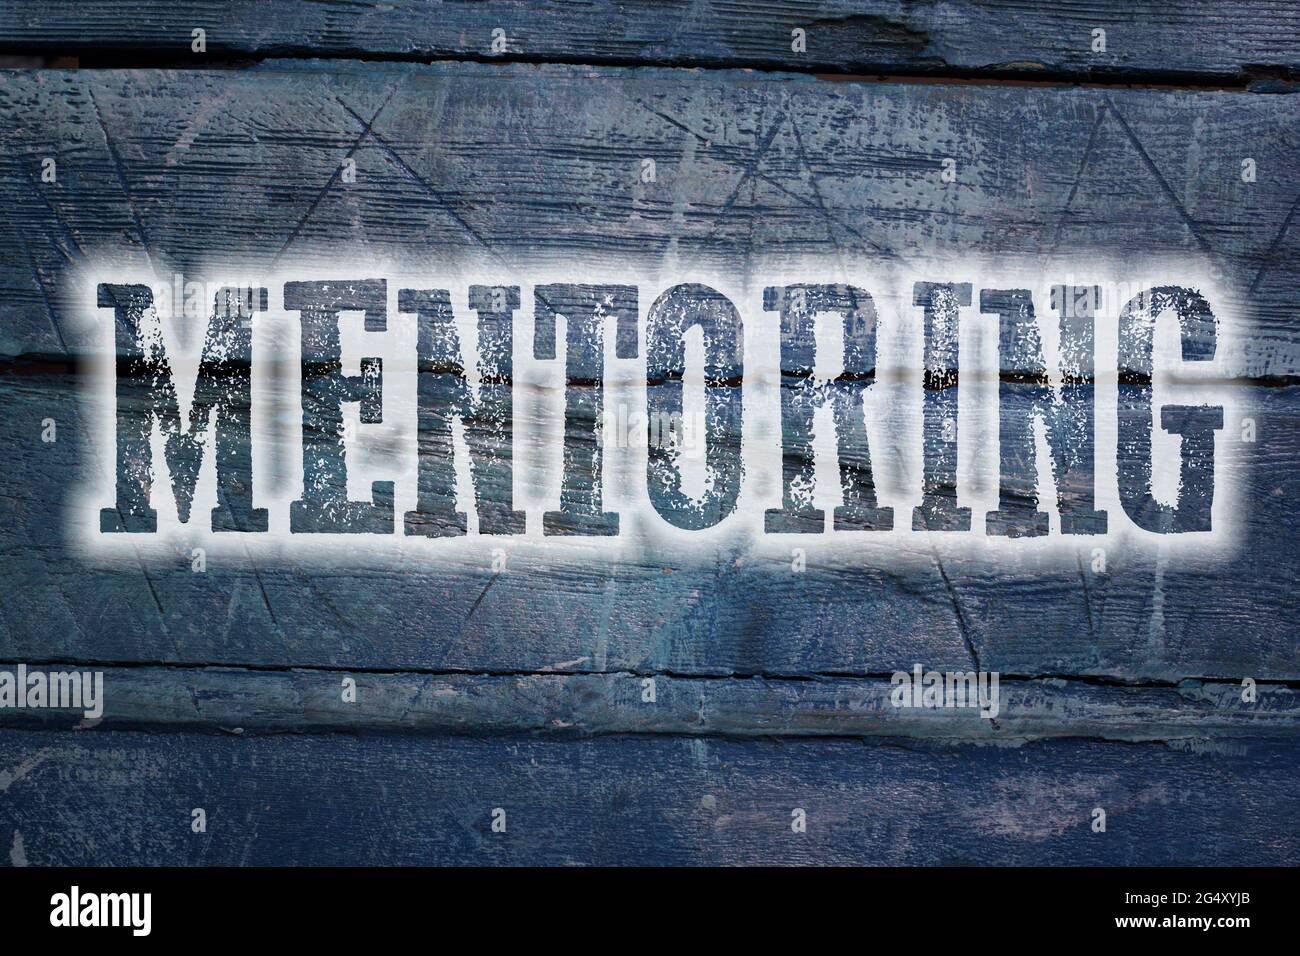 Mentoring Concept text on background Stock Photo